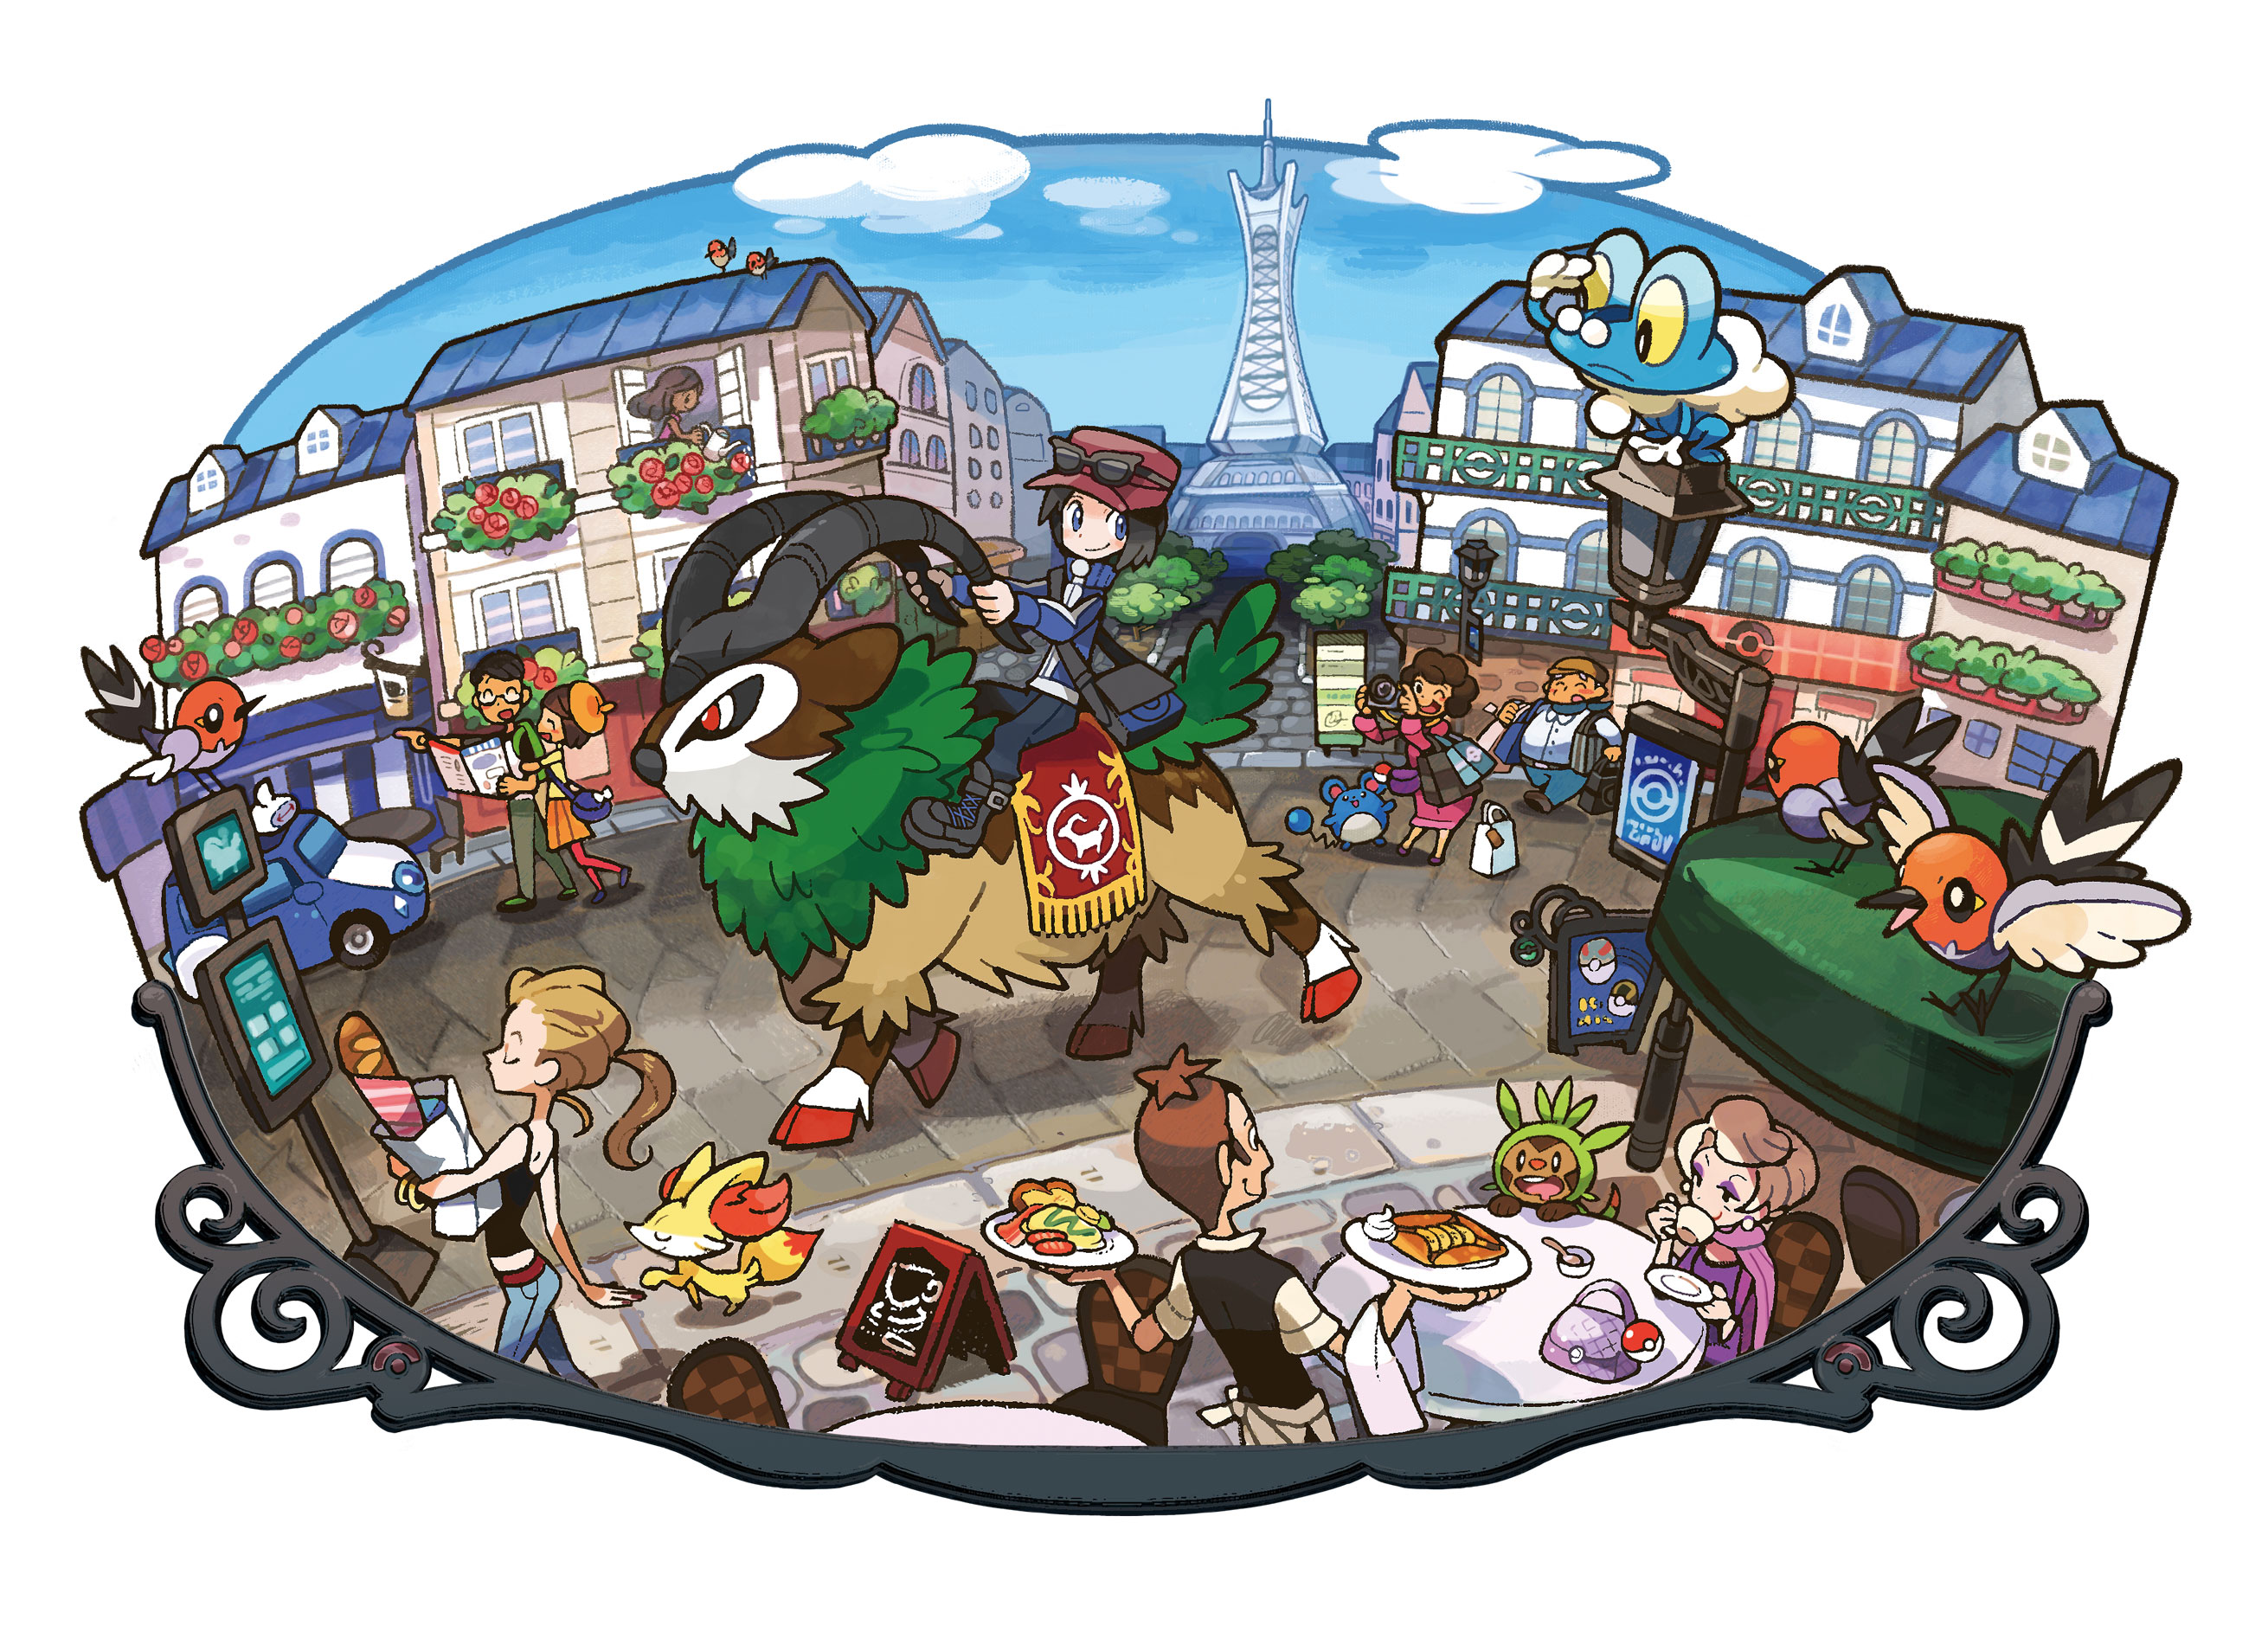 pokemon x and y 3ds